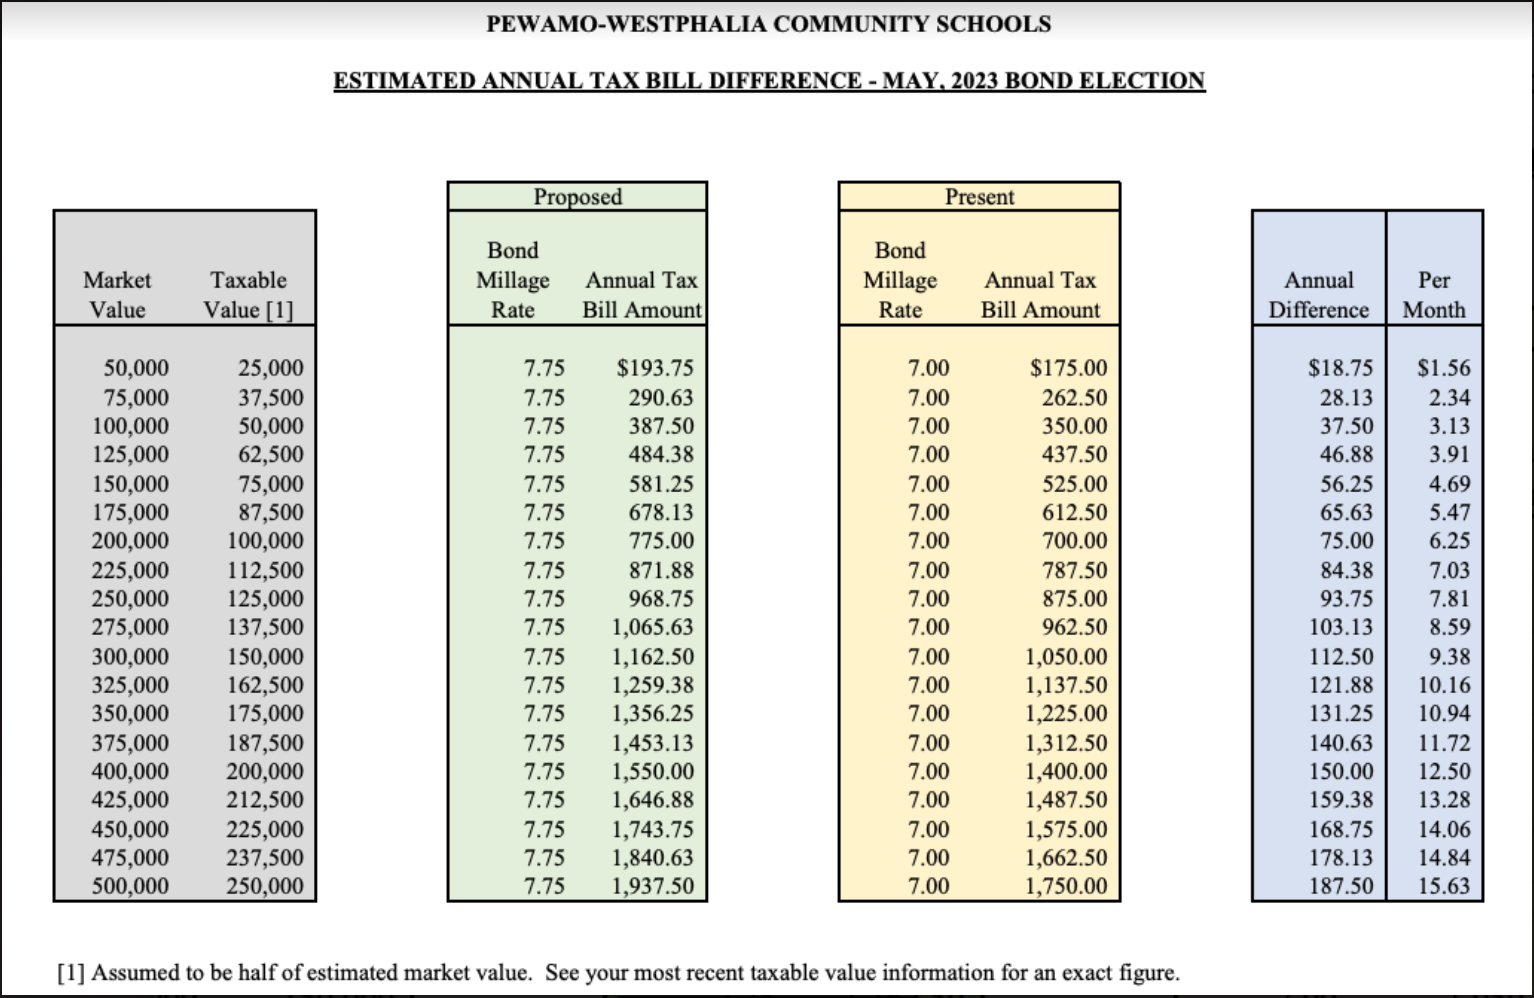 This chart shows different property prices with the present and proposed tax rate with the 2023 bond proposal.